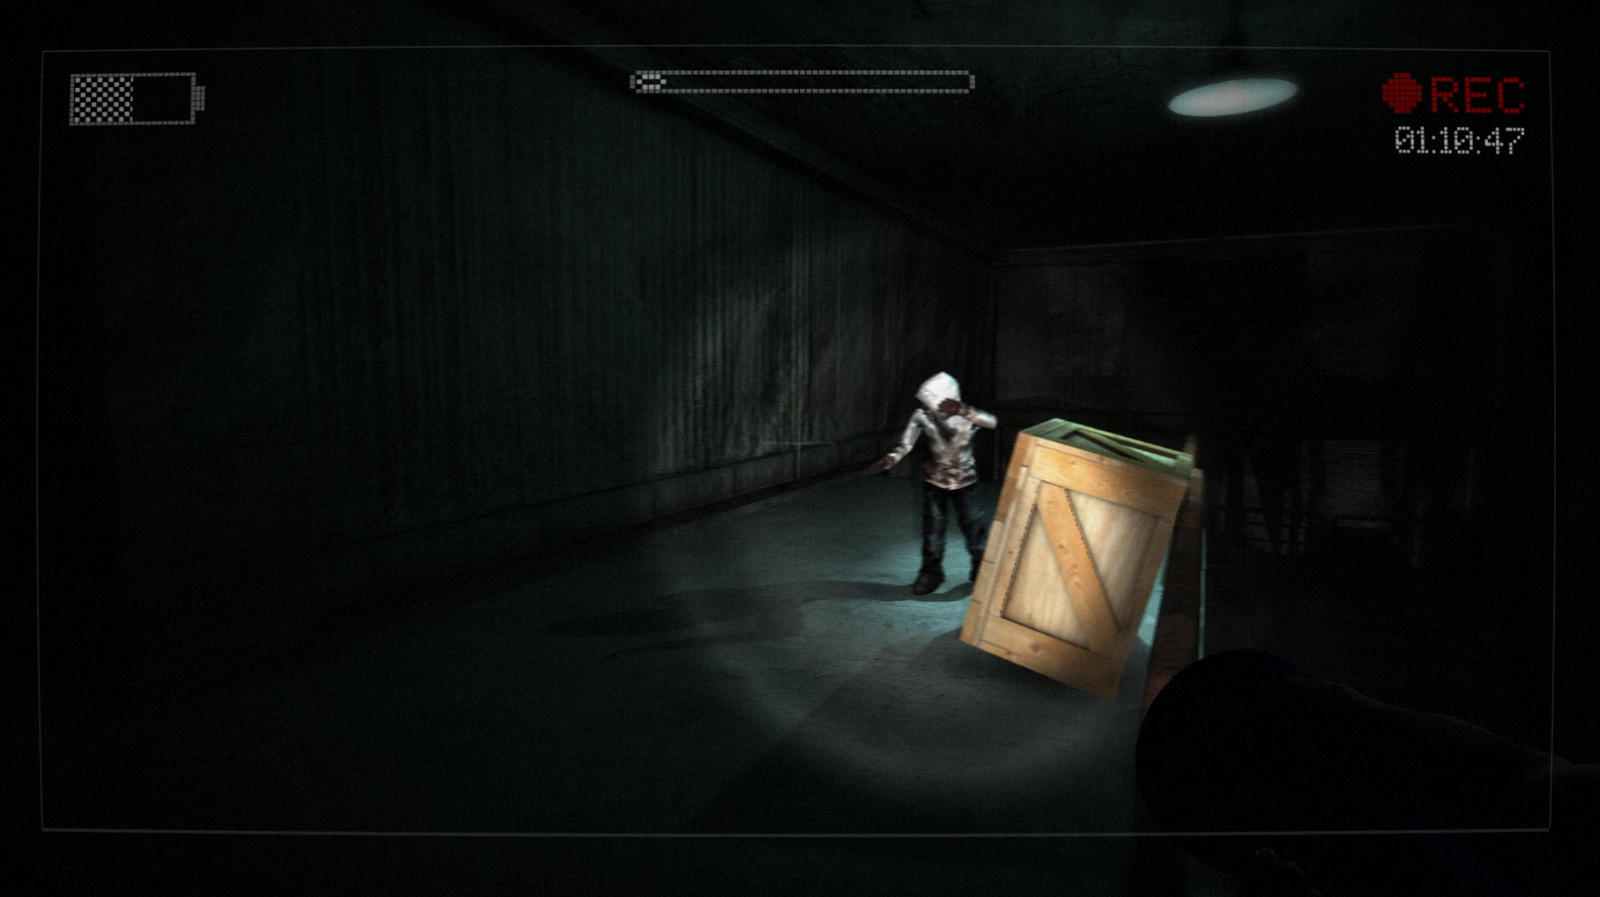 Save 90% on Slender: The Arrival on Steam